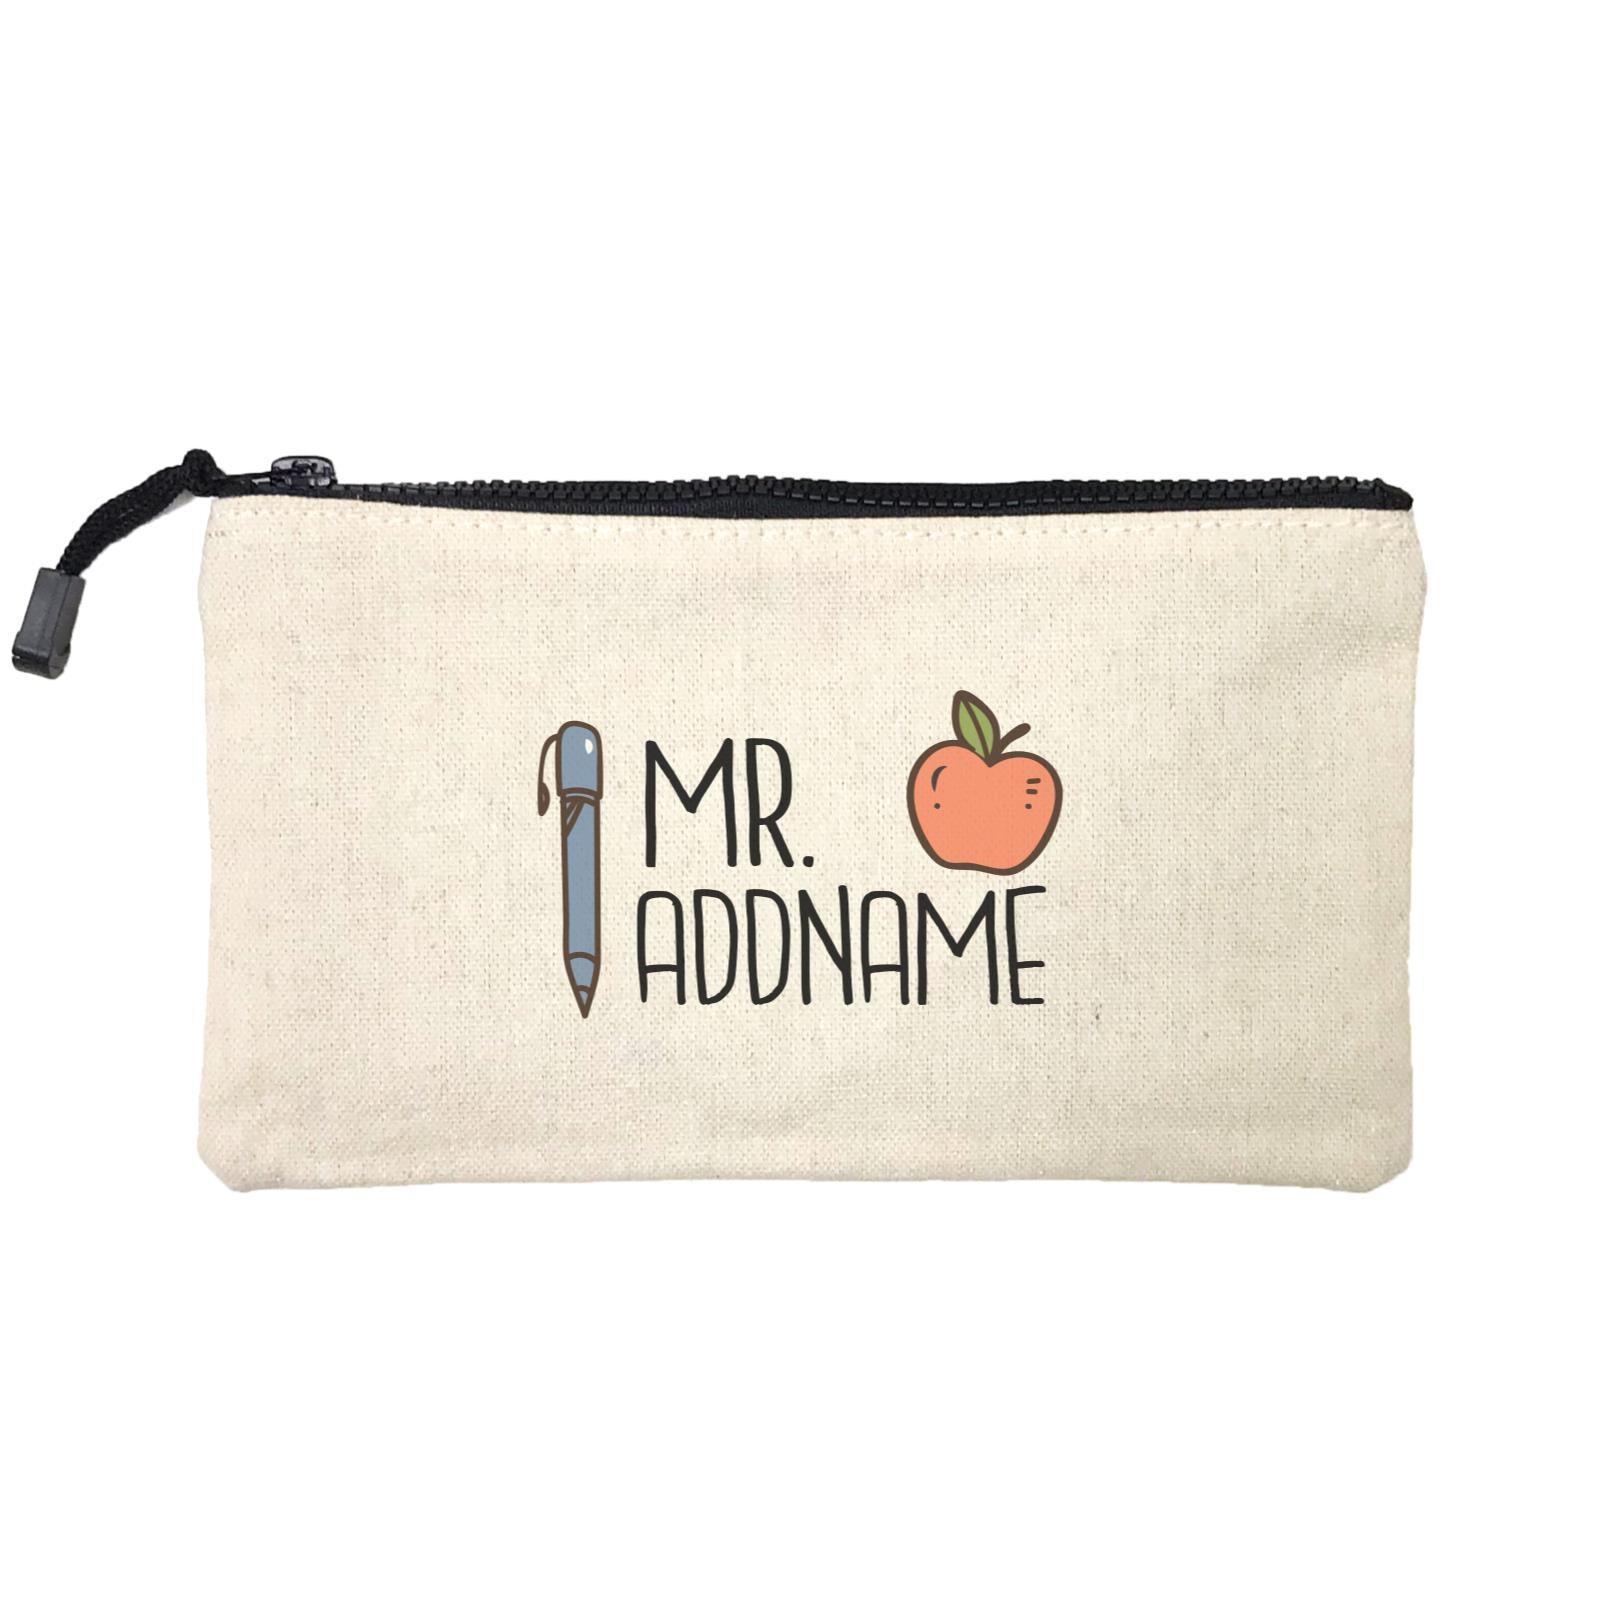 Teacher Addname Apple And Pen Mr Addname Mini Accessories Stationery Pouch